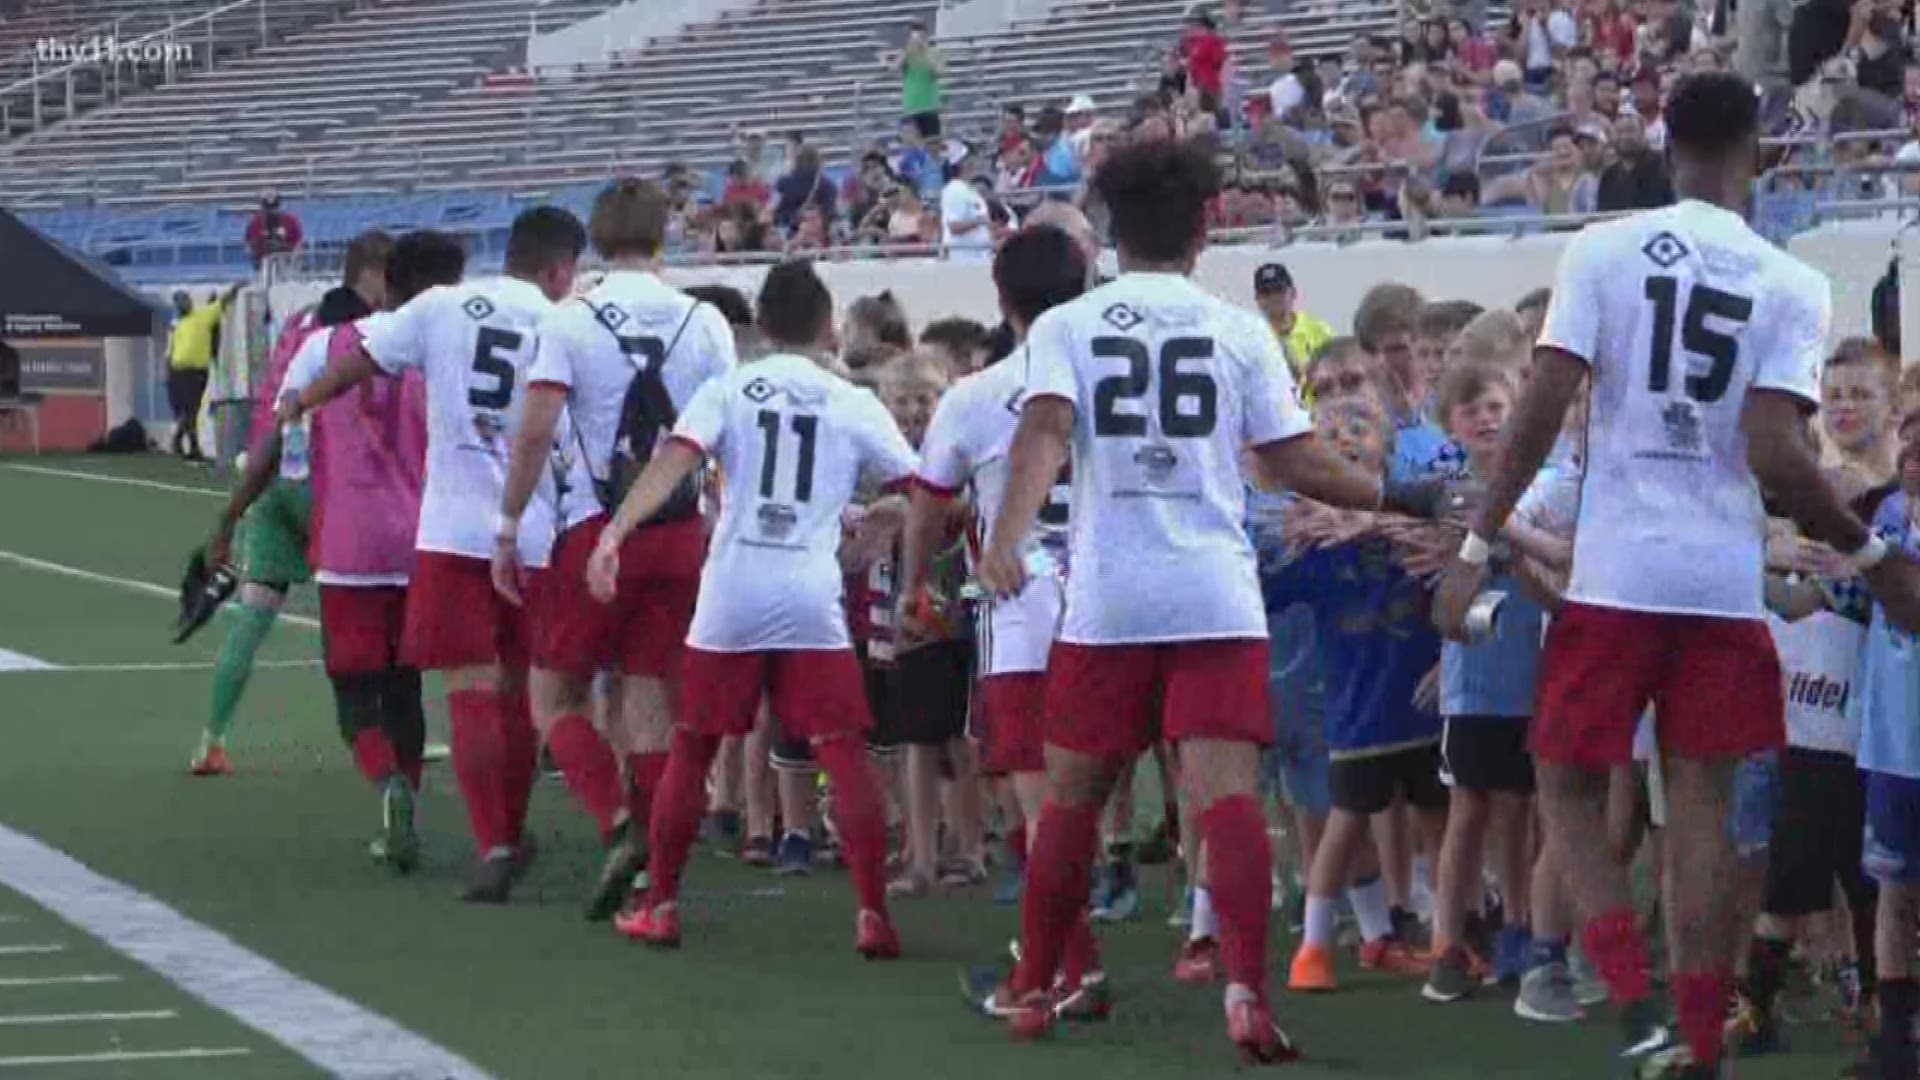 LR Rangers advance with 1-0 win over Tulsa